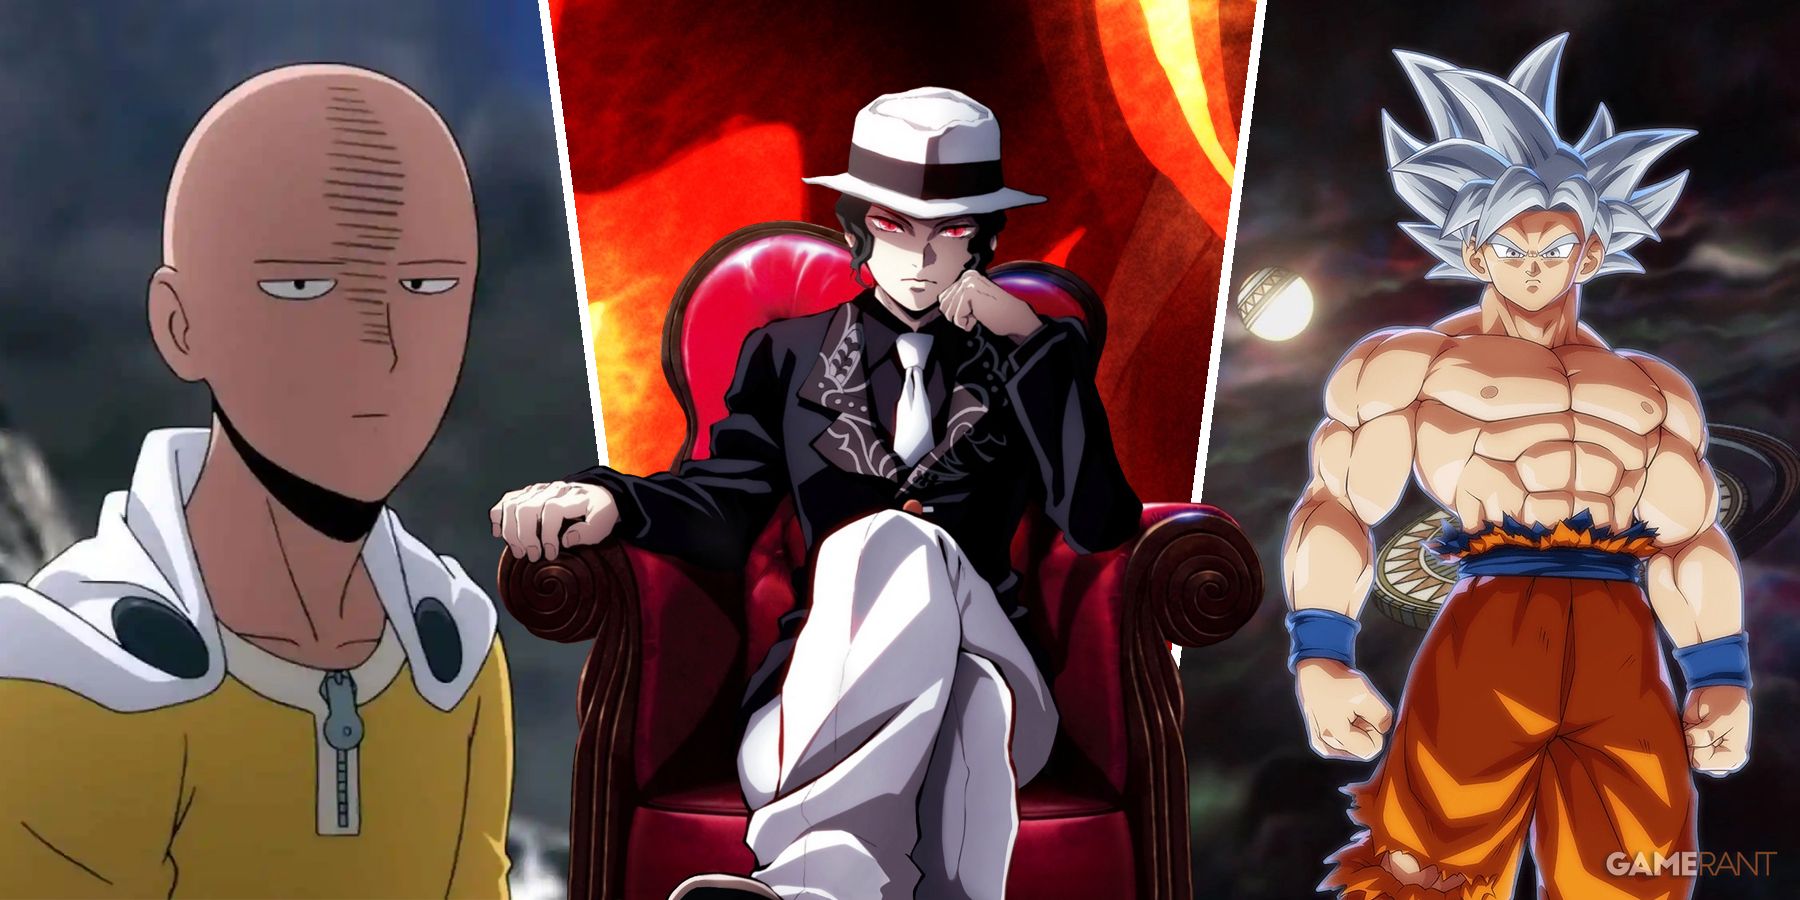 10 minor One Piece characters who have more screen-time than Shanks